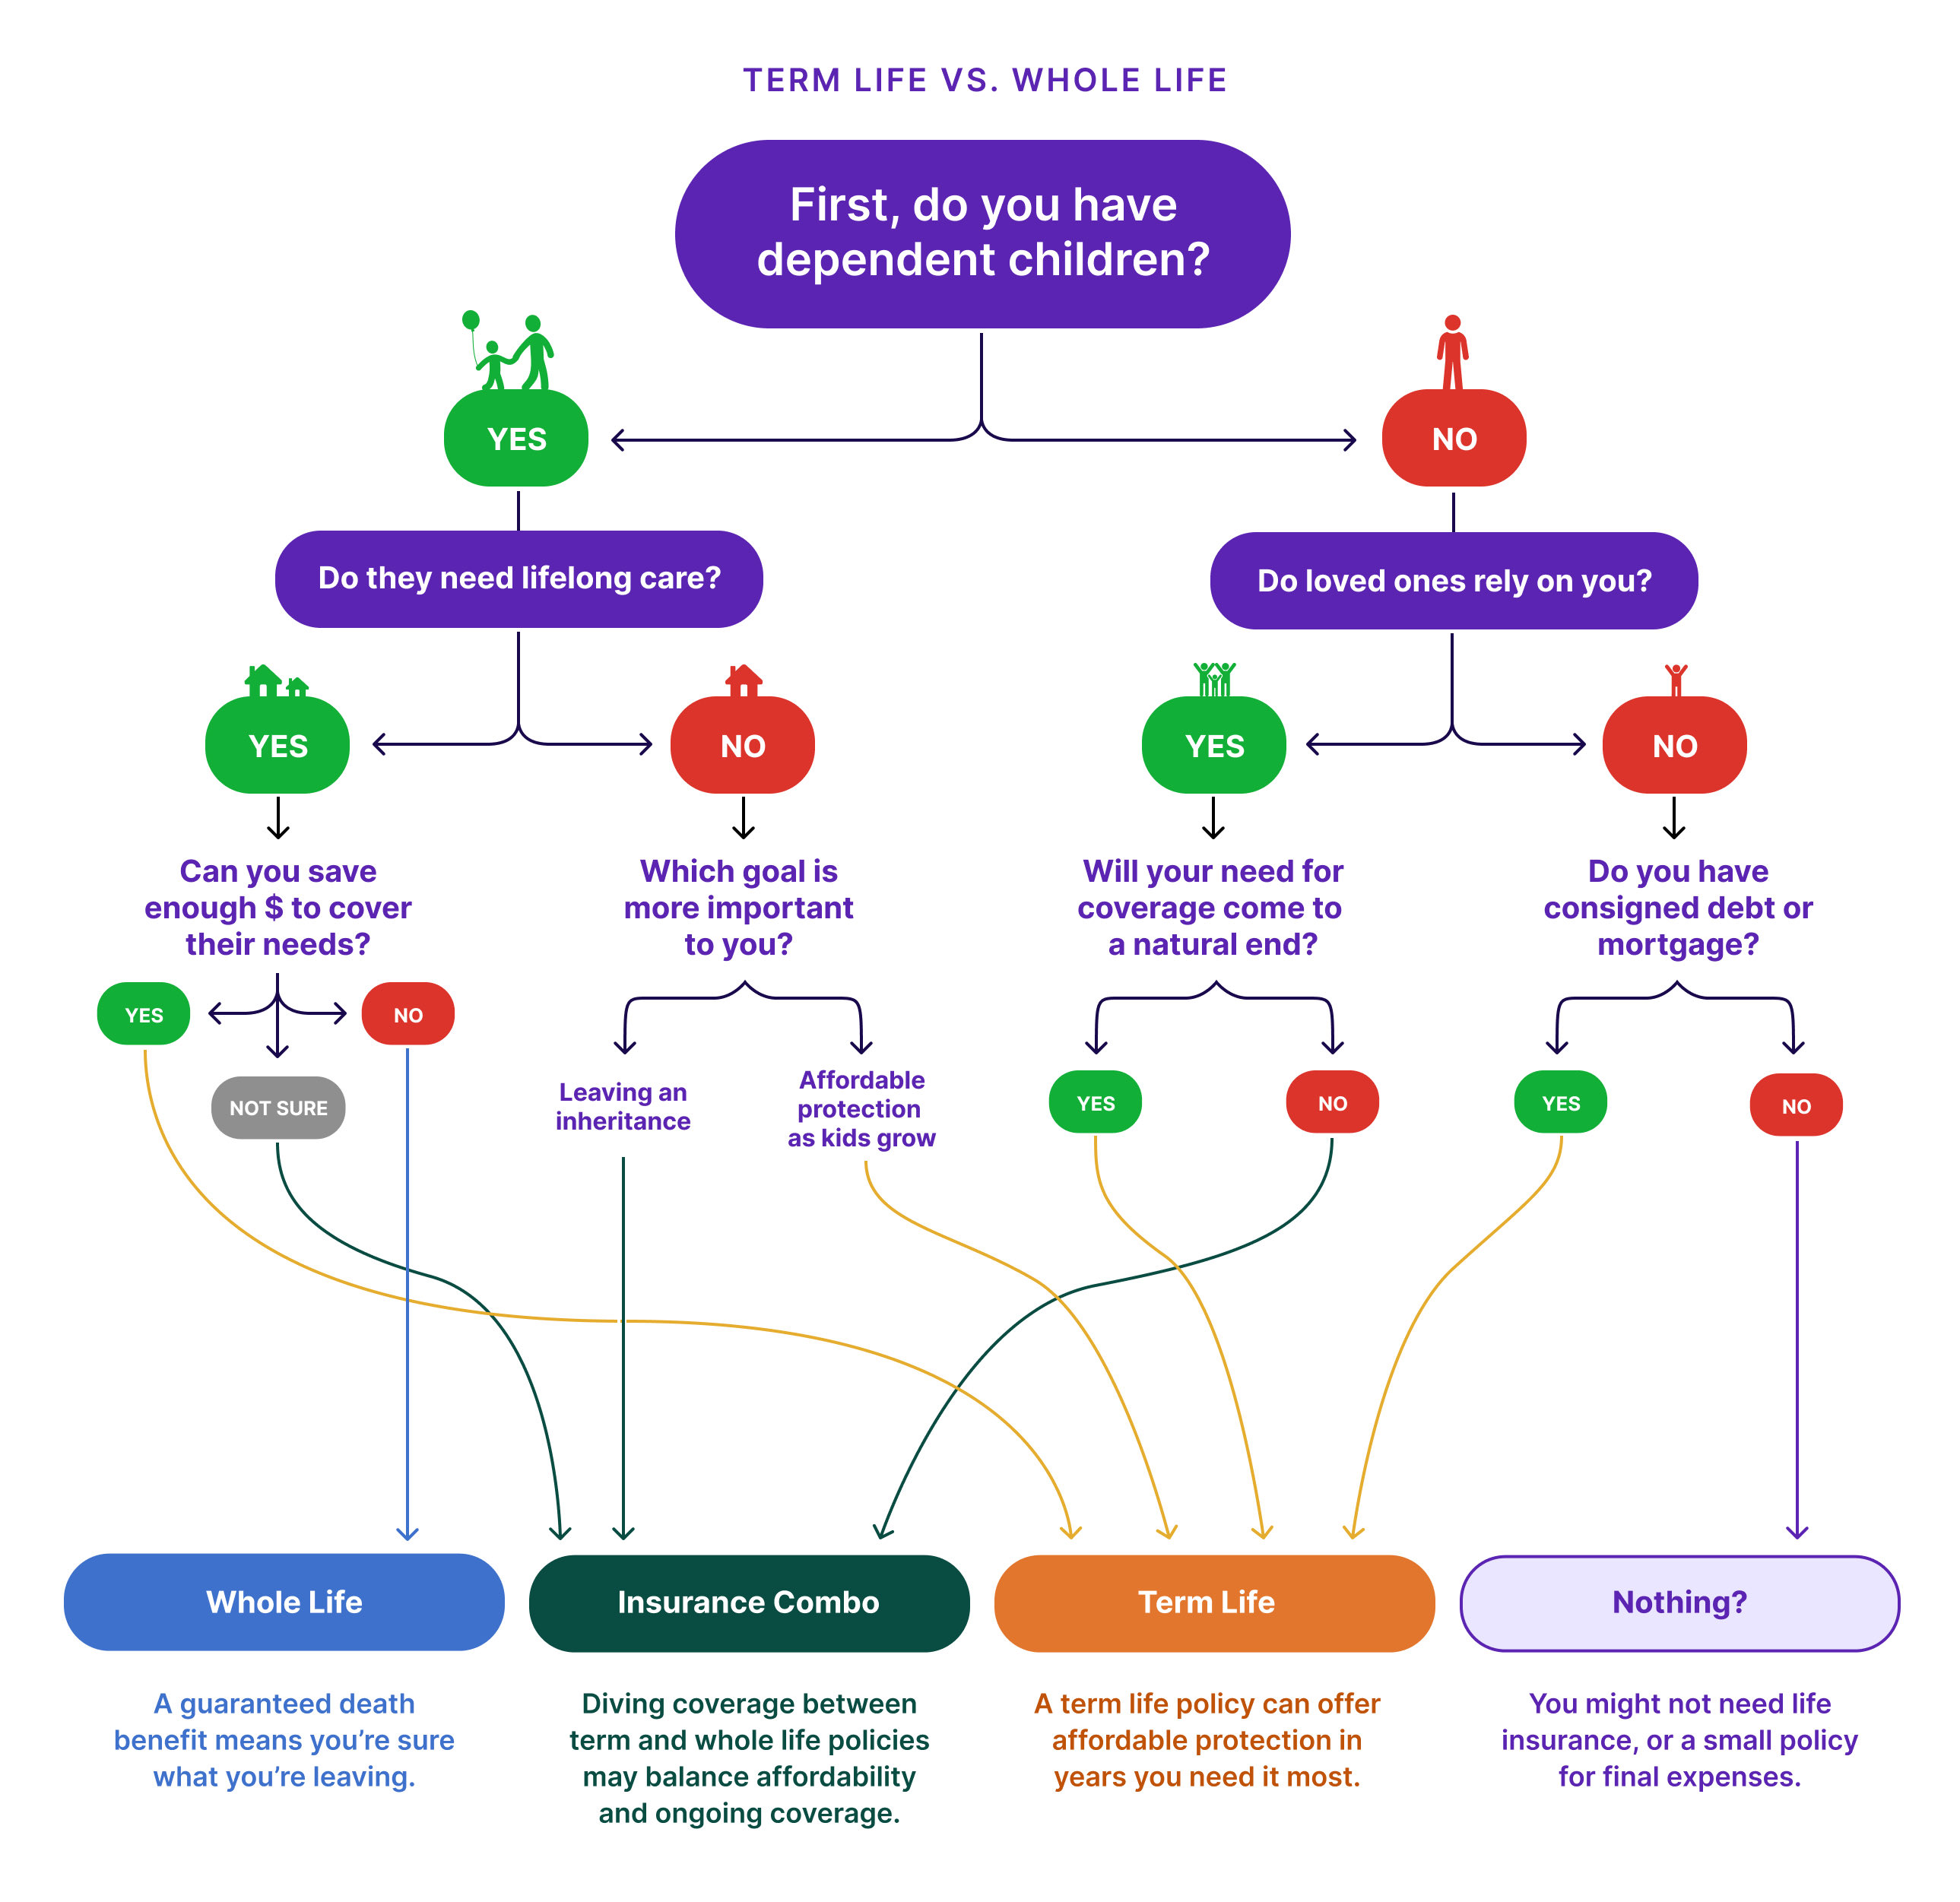 A flow chart depicts whether term life, whole life, an insurance combo, or no life insurance are appropriate for you based on the initial questions that ask whether you have dependent children that need lifelong care or if loved ones rely on you.